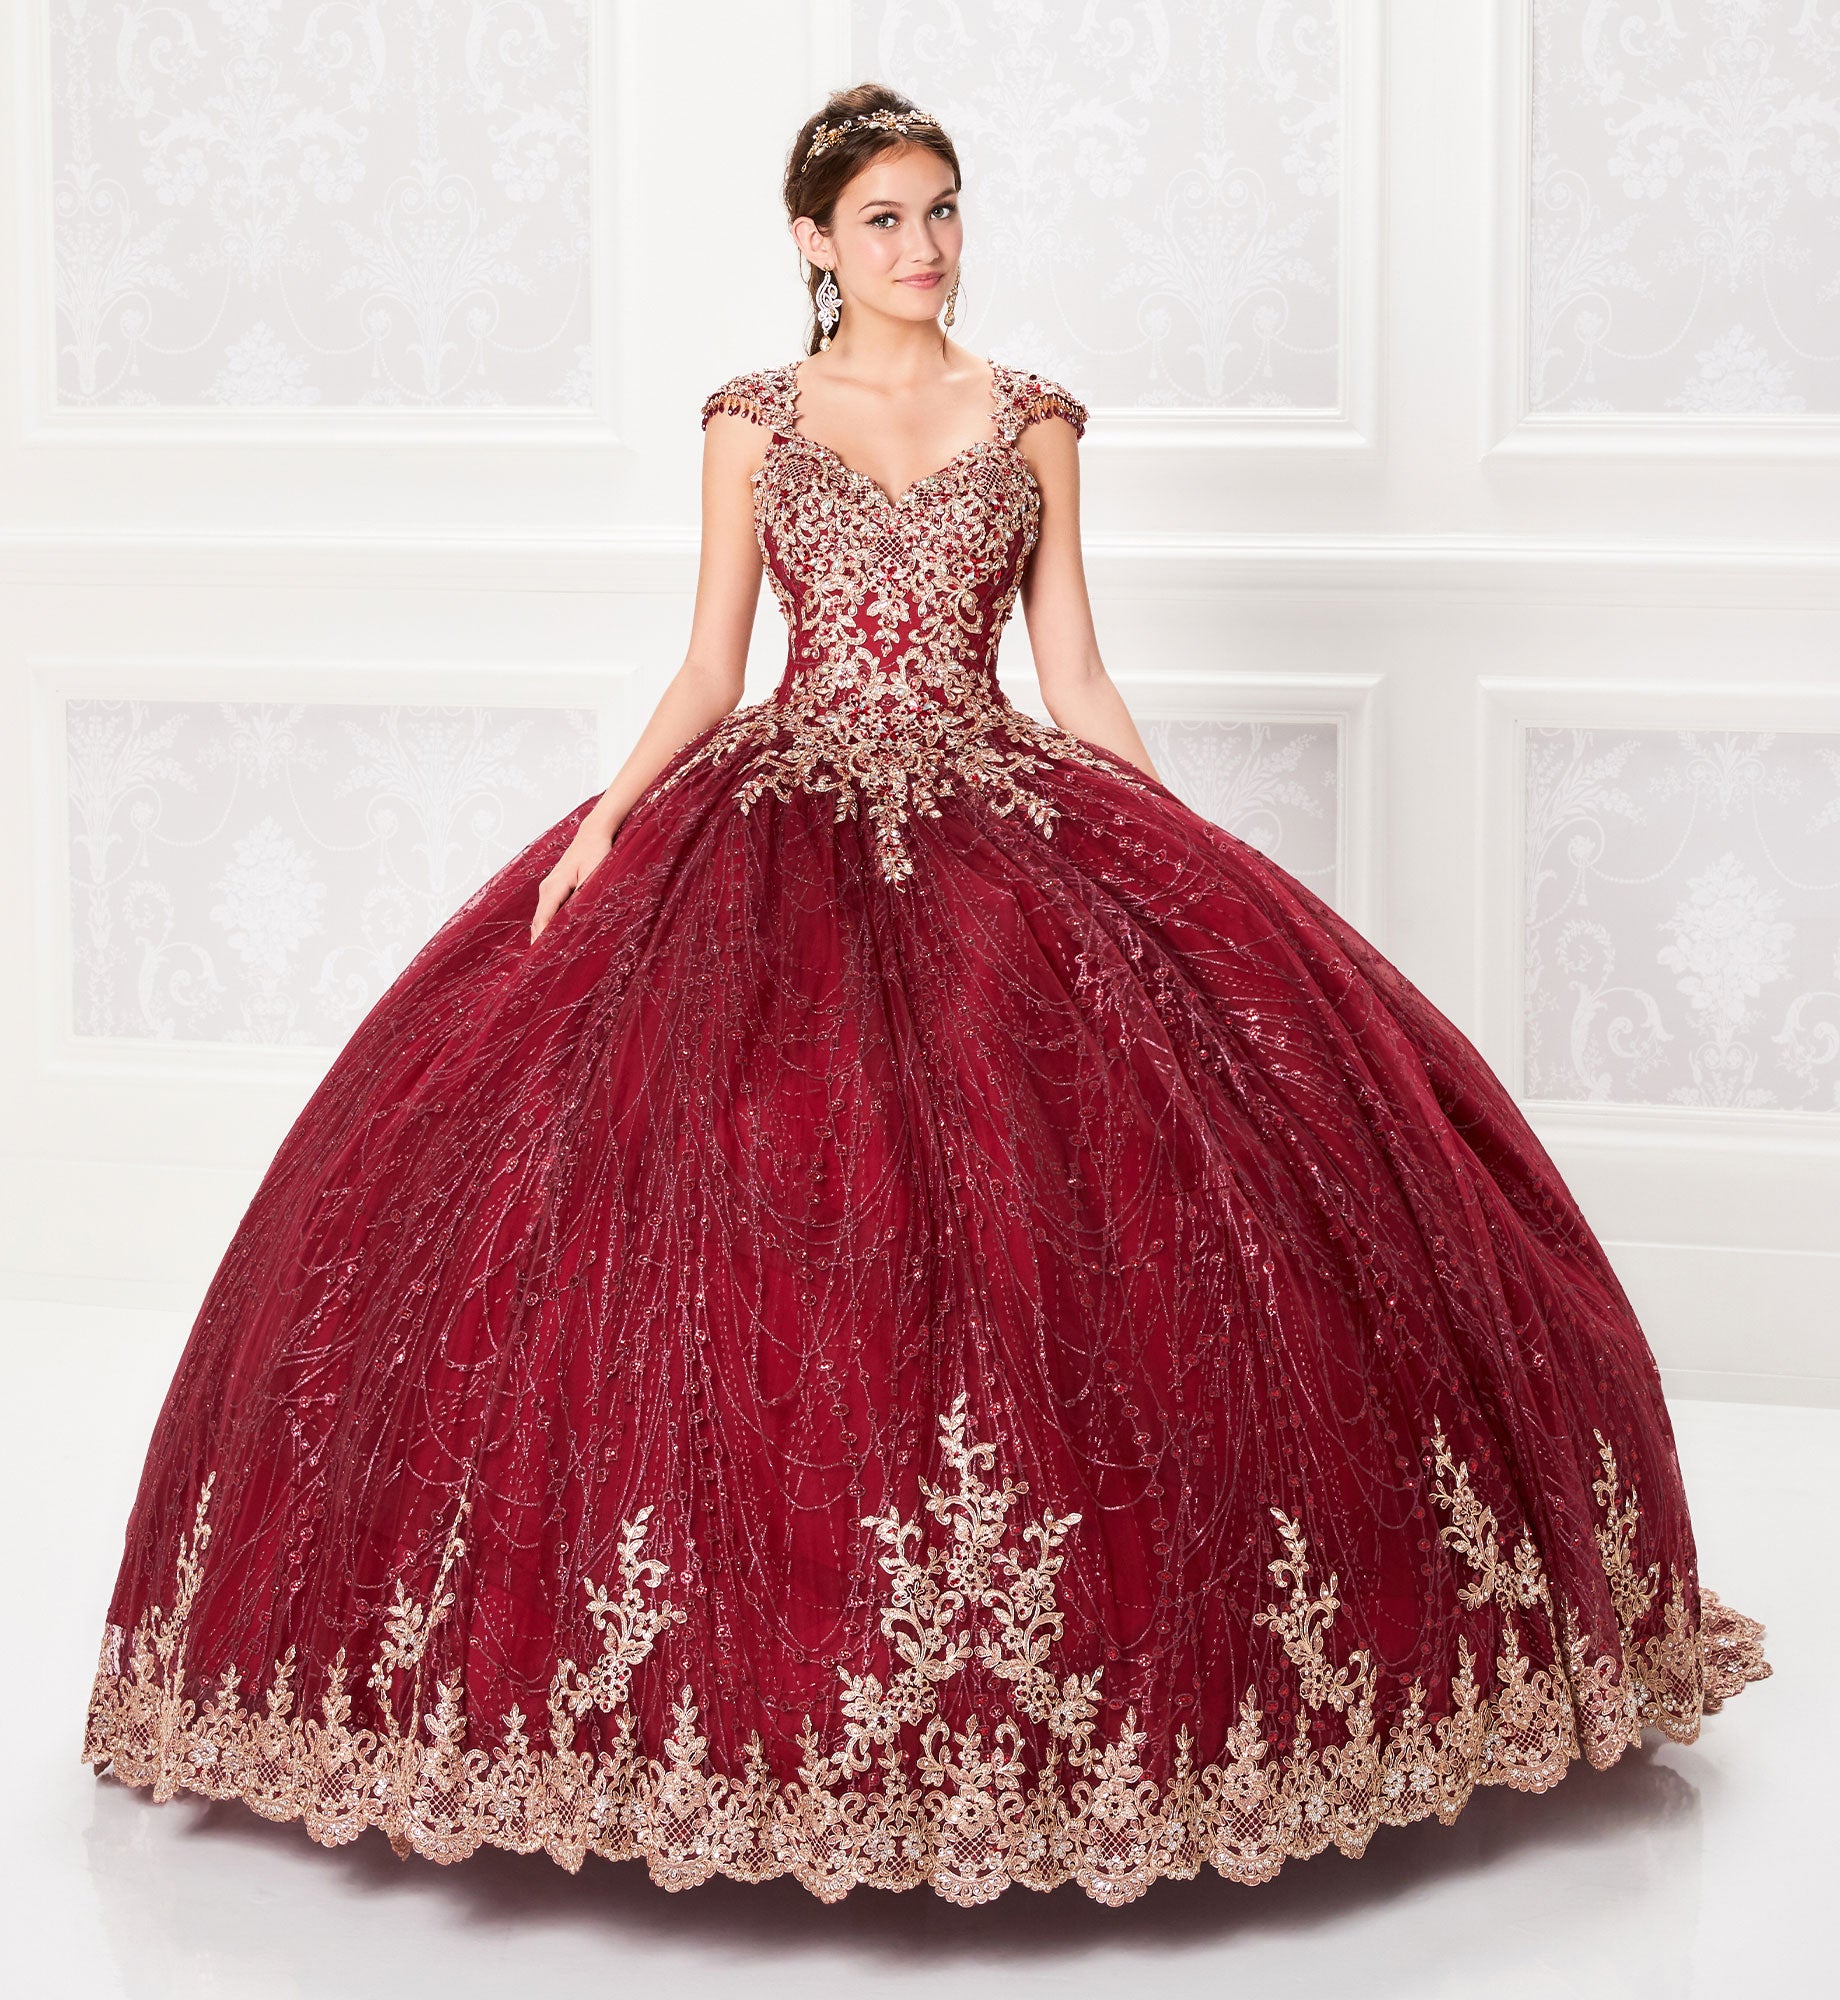 Cute quinceanera dress with cap sleeves and sparkly stone accents